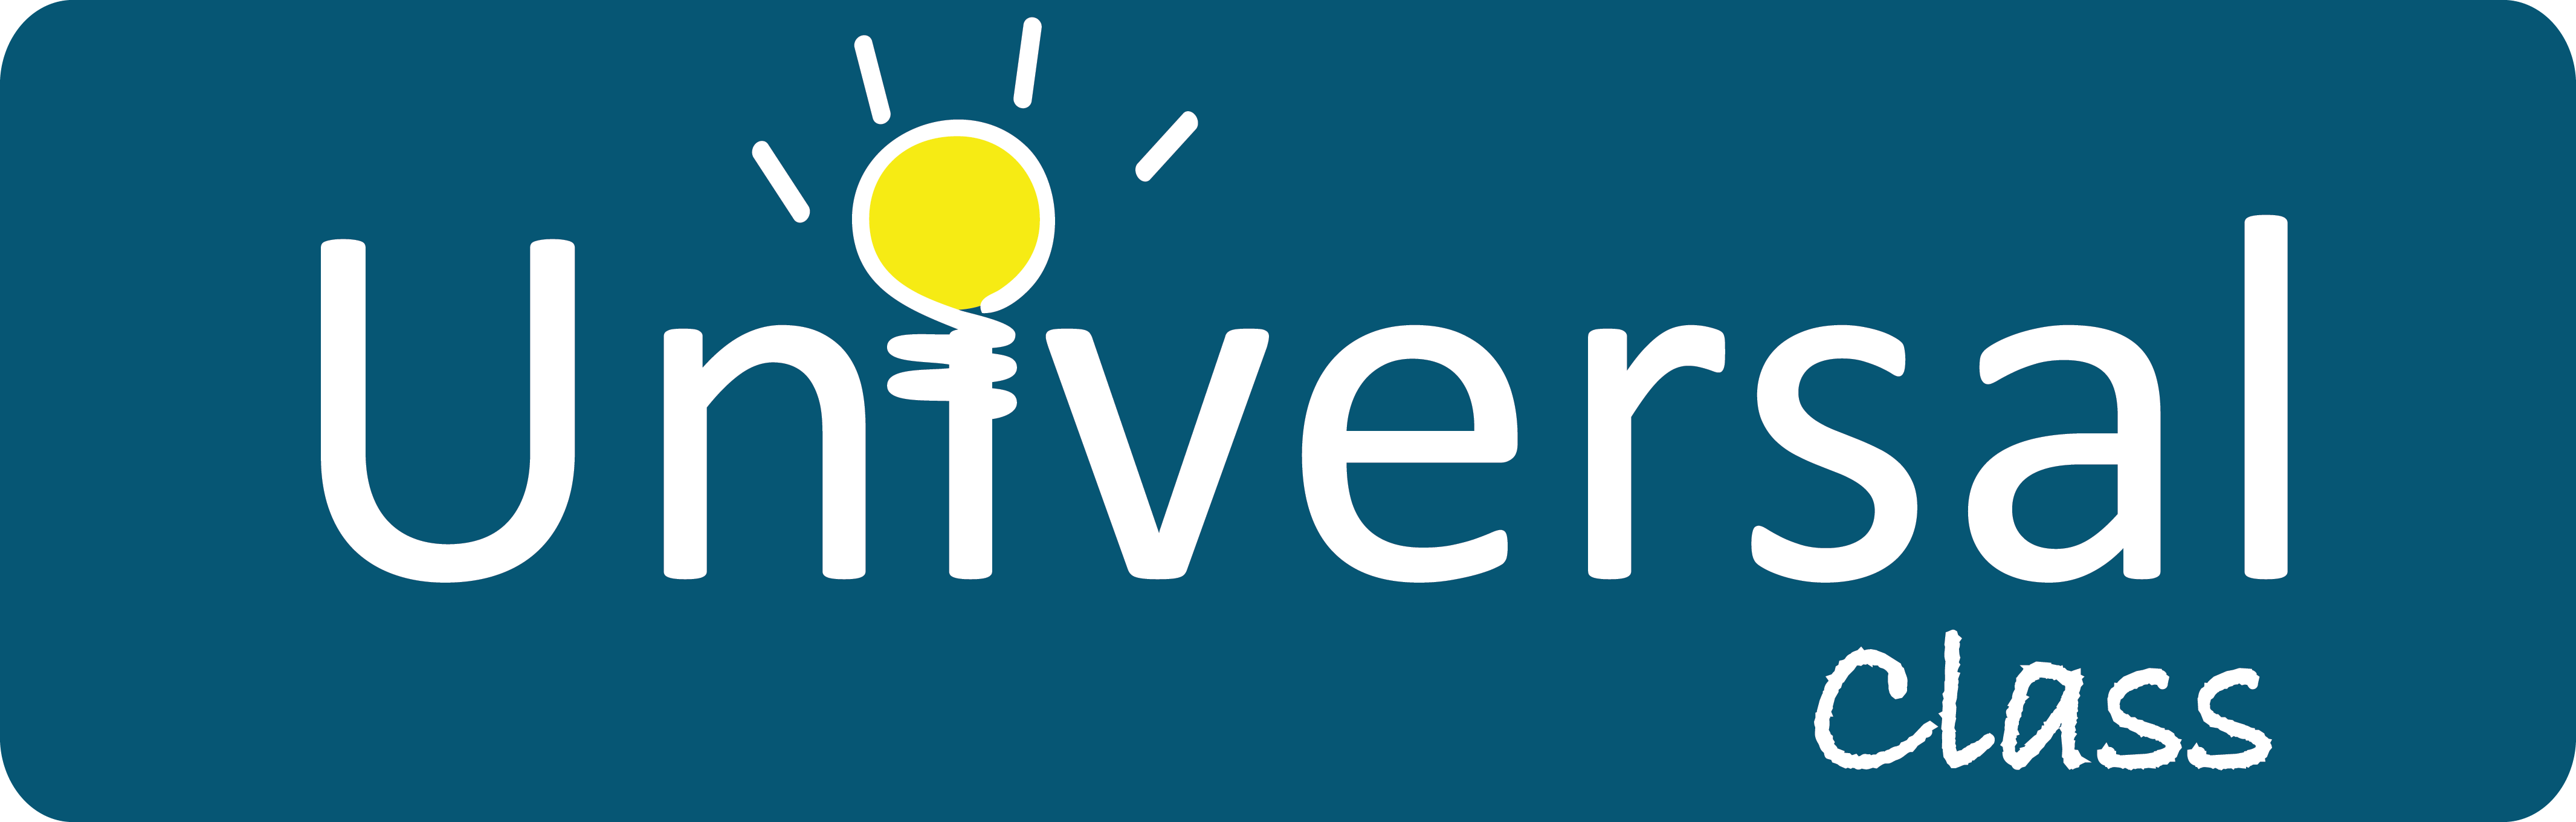 Logo; Blue rectangle, rounded corners; White text: "Universal Class" with a lightbulb at the top of the "i" in "Universal"